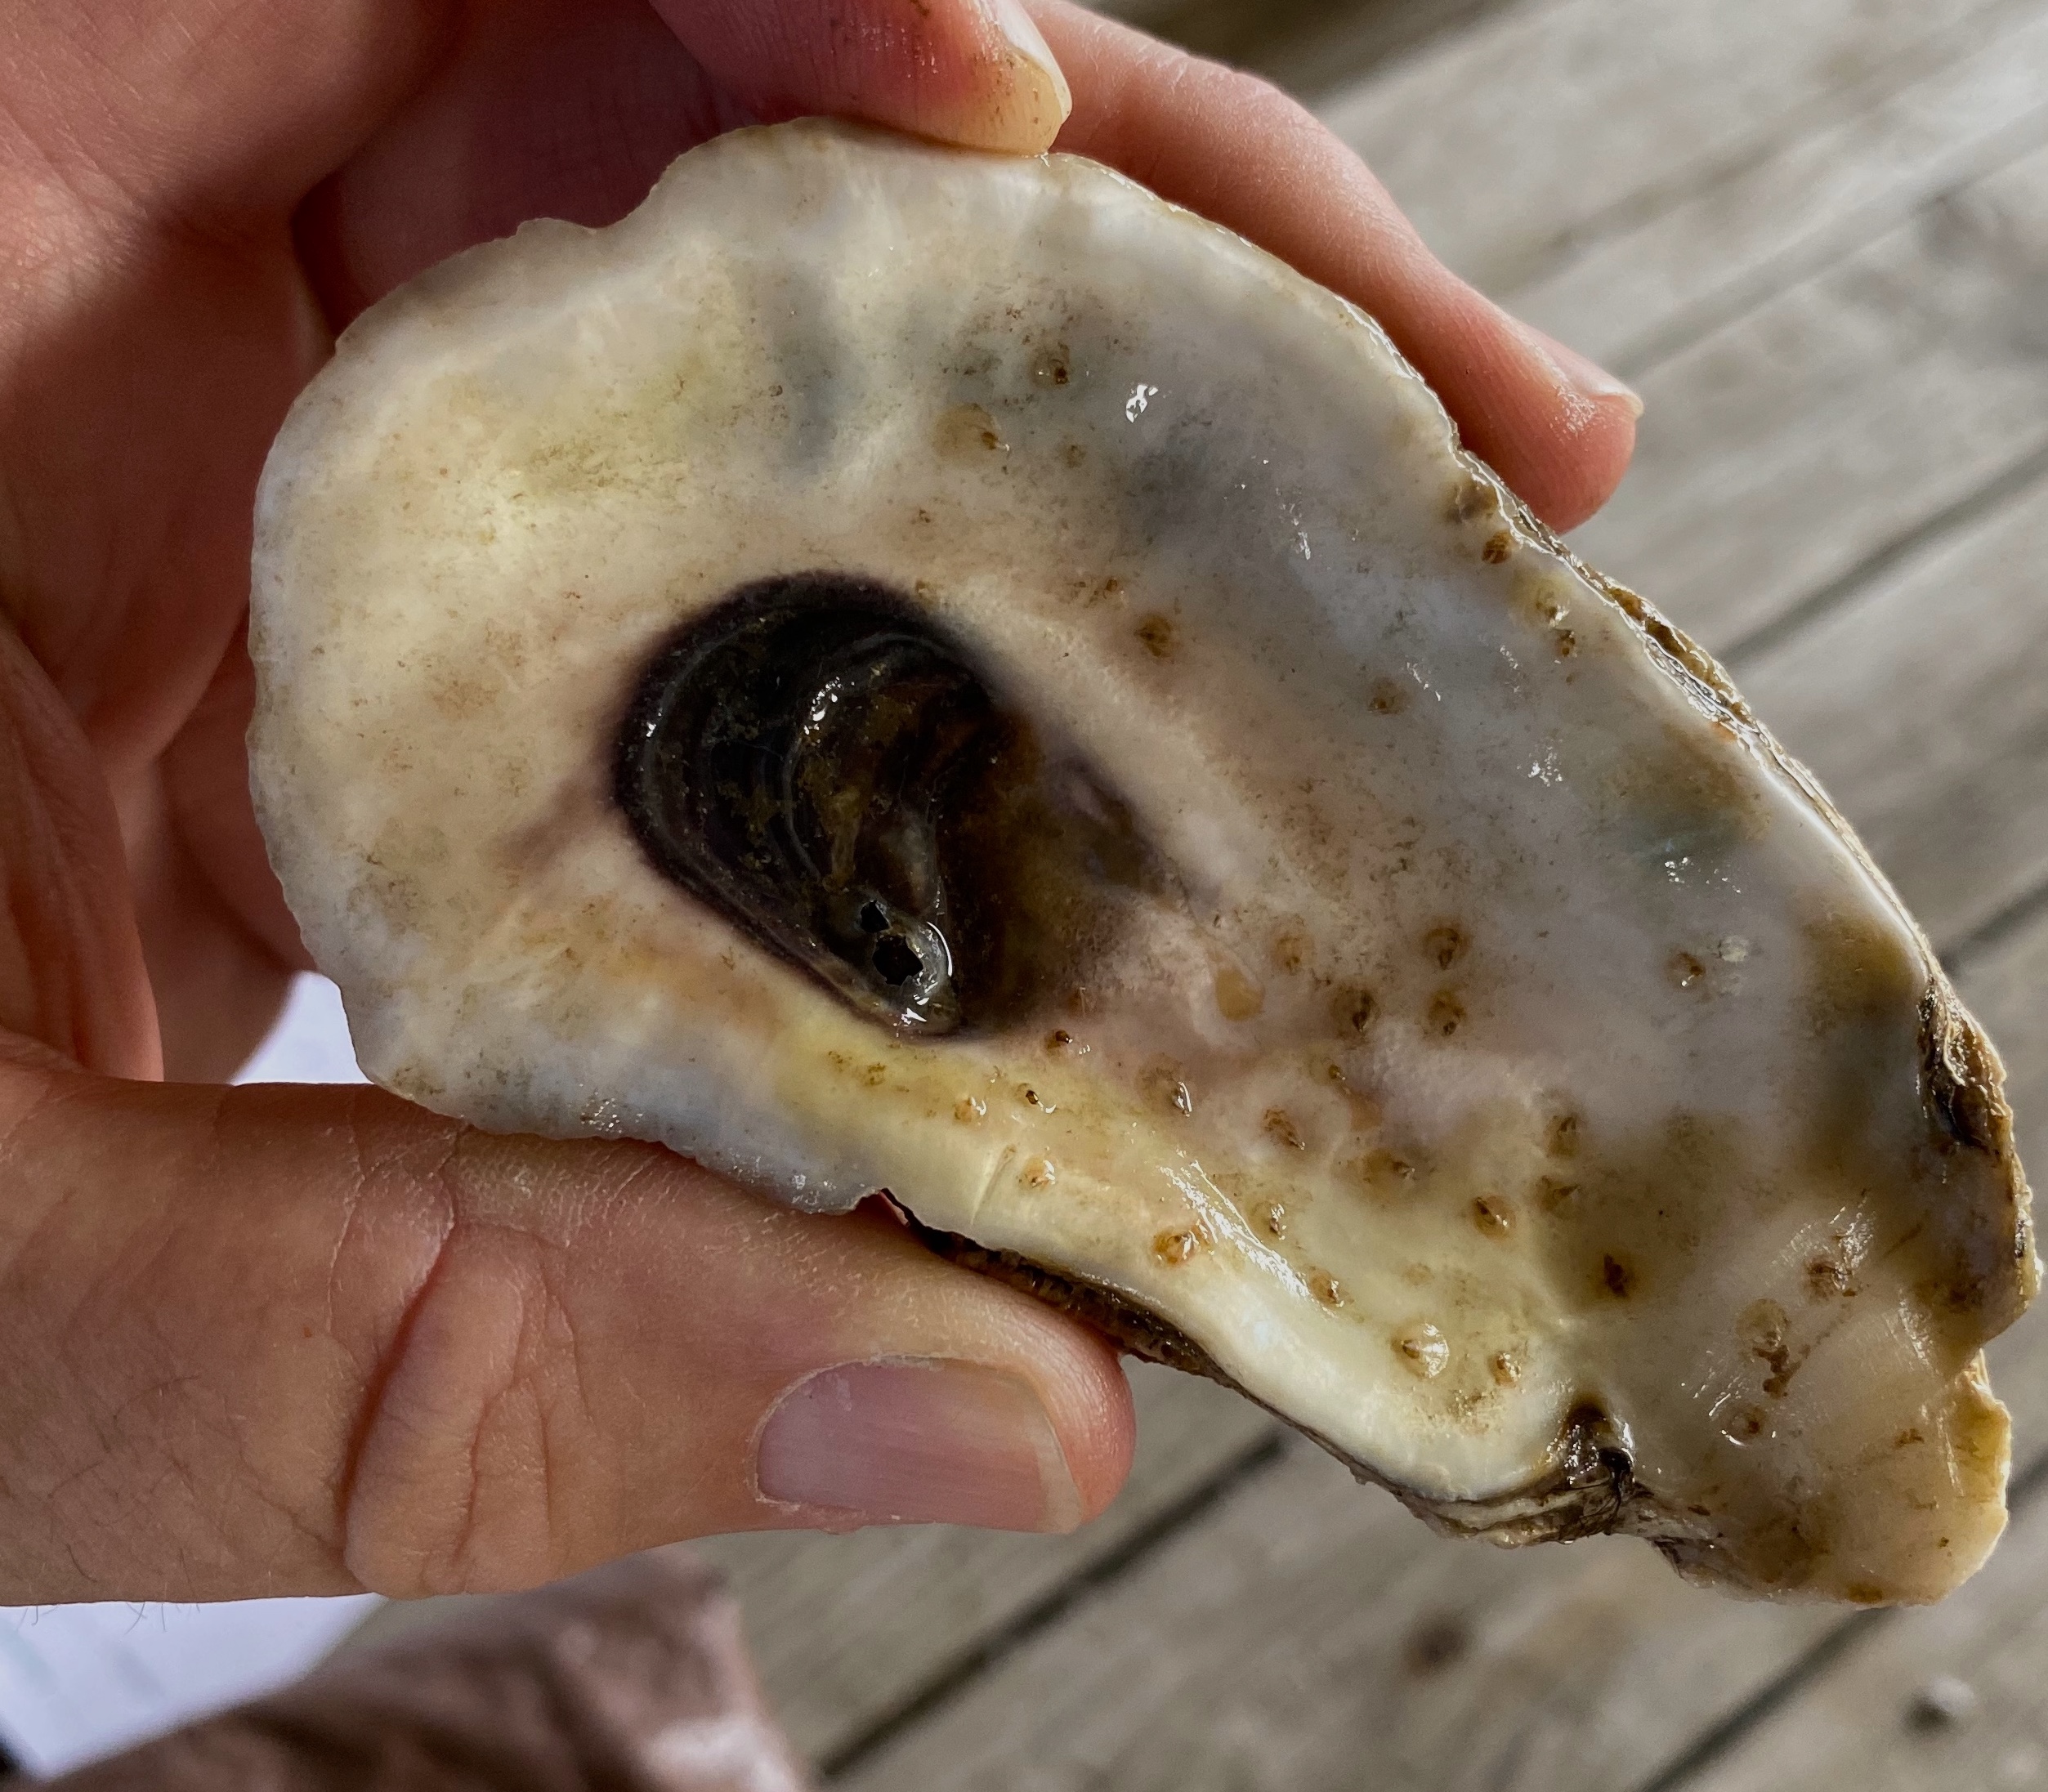 Small brown ovals are juvenile oysters that have set on an old oyster shell. All photos courtesy of John Lambeth (NCFBF).